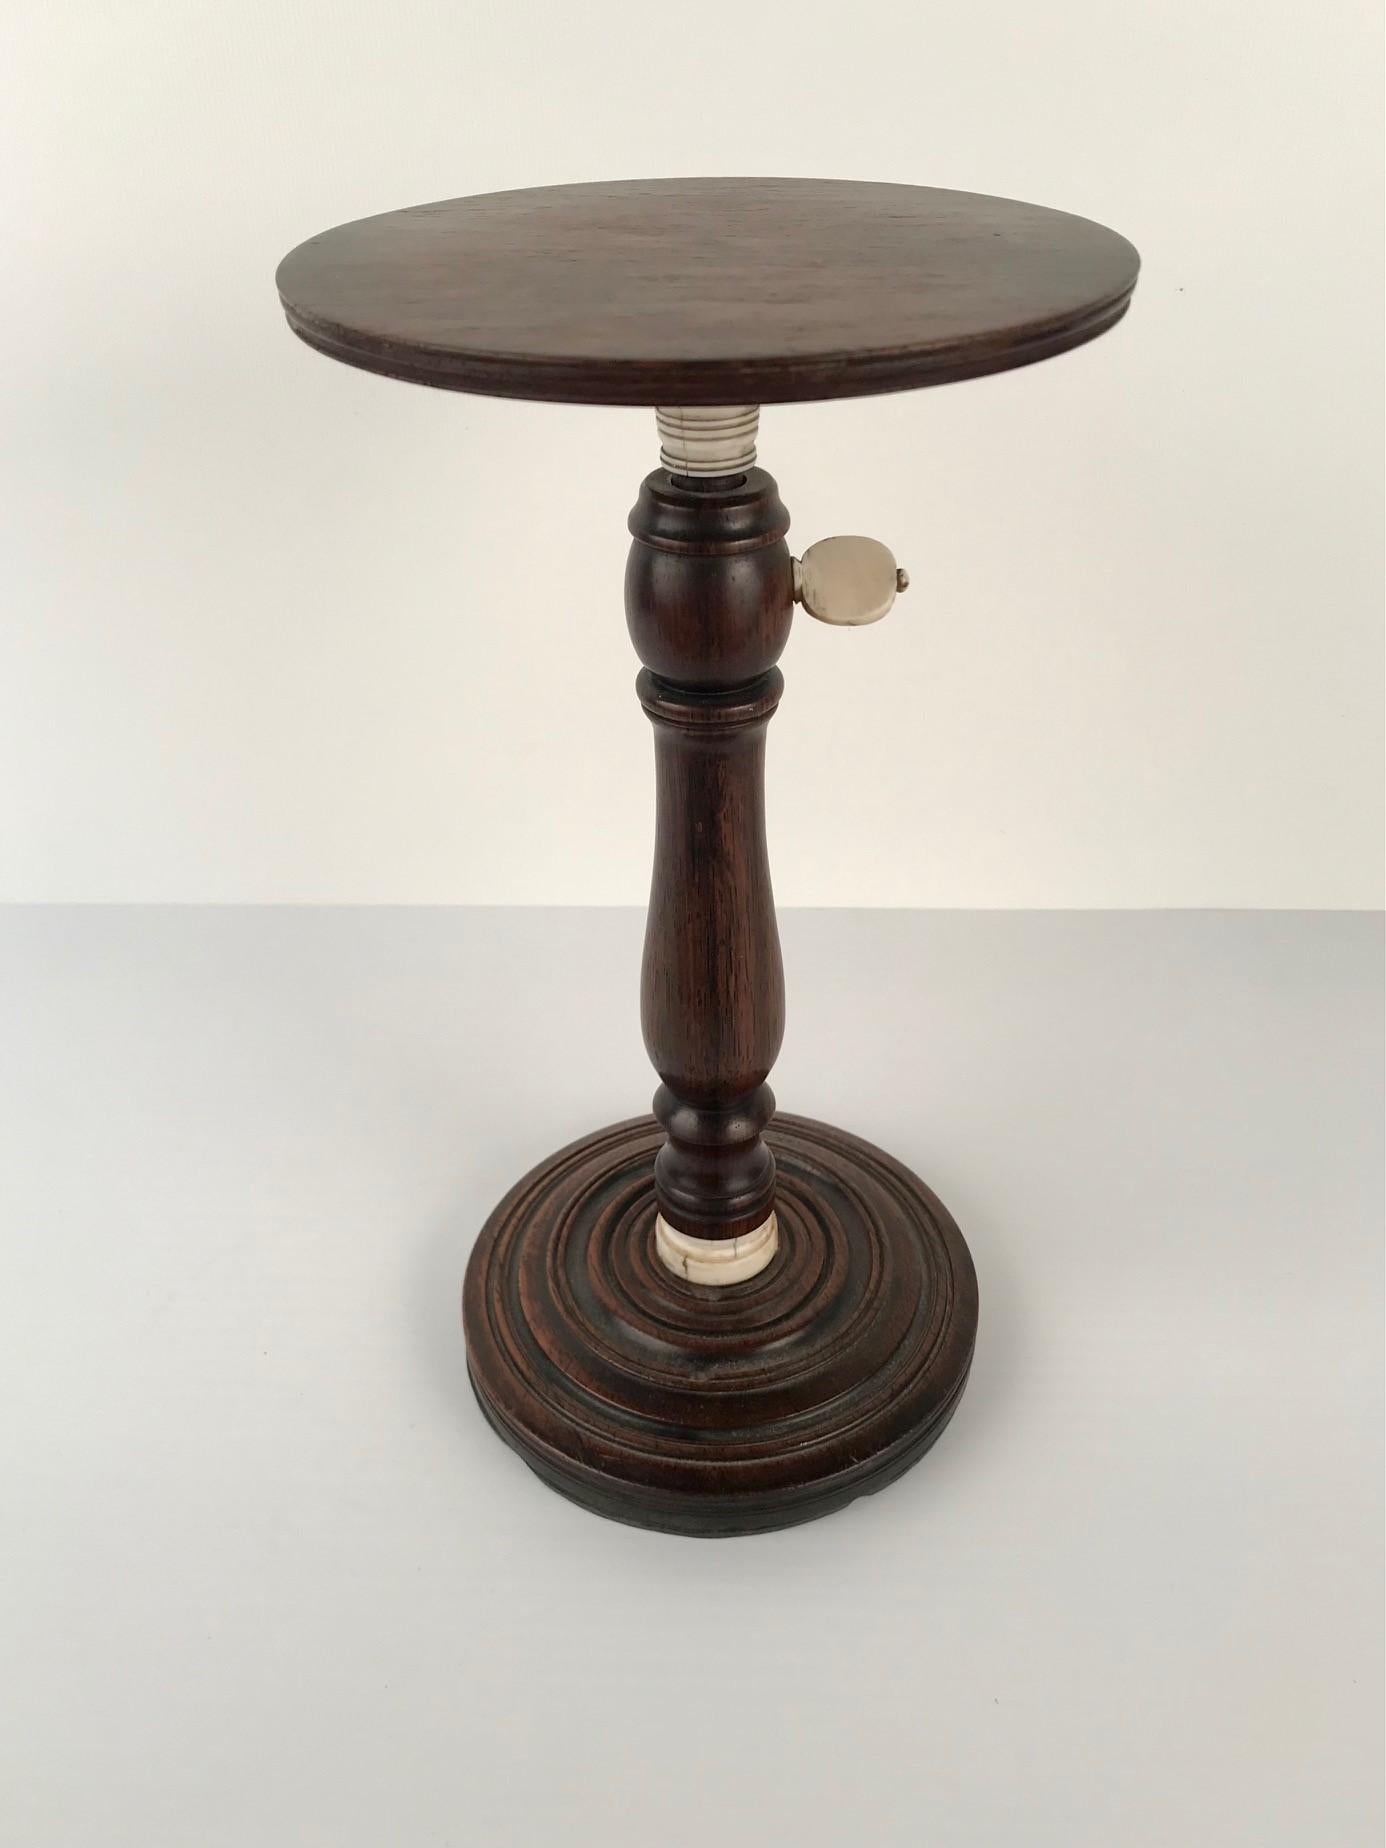 Made towards the end of the 18th century, its original purpose was to increase and decrease the amount of light, for reading, embroidery and suchlike, by raising and lowering the pedestal, which moved the candle up and down. This particular example